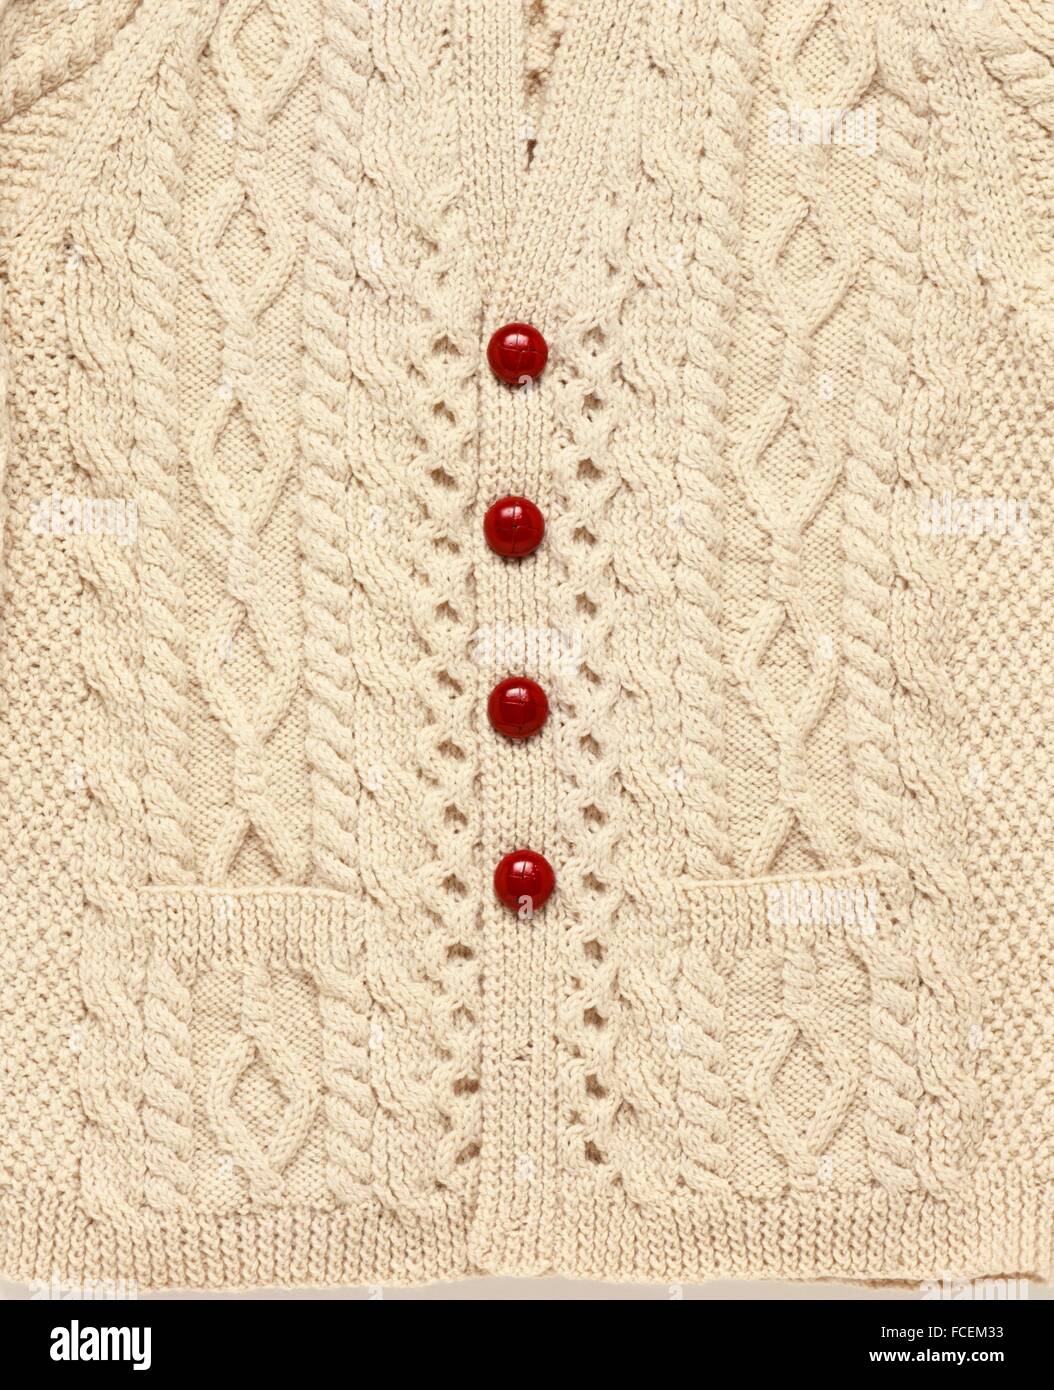 Red leather buttons on knitted beige cardigan, close-up Stock Photo